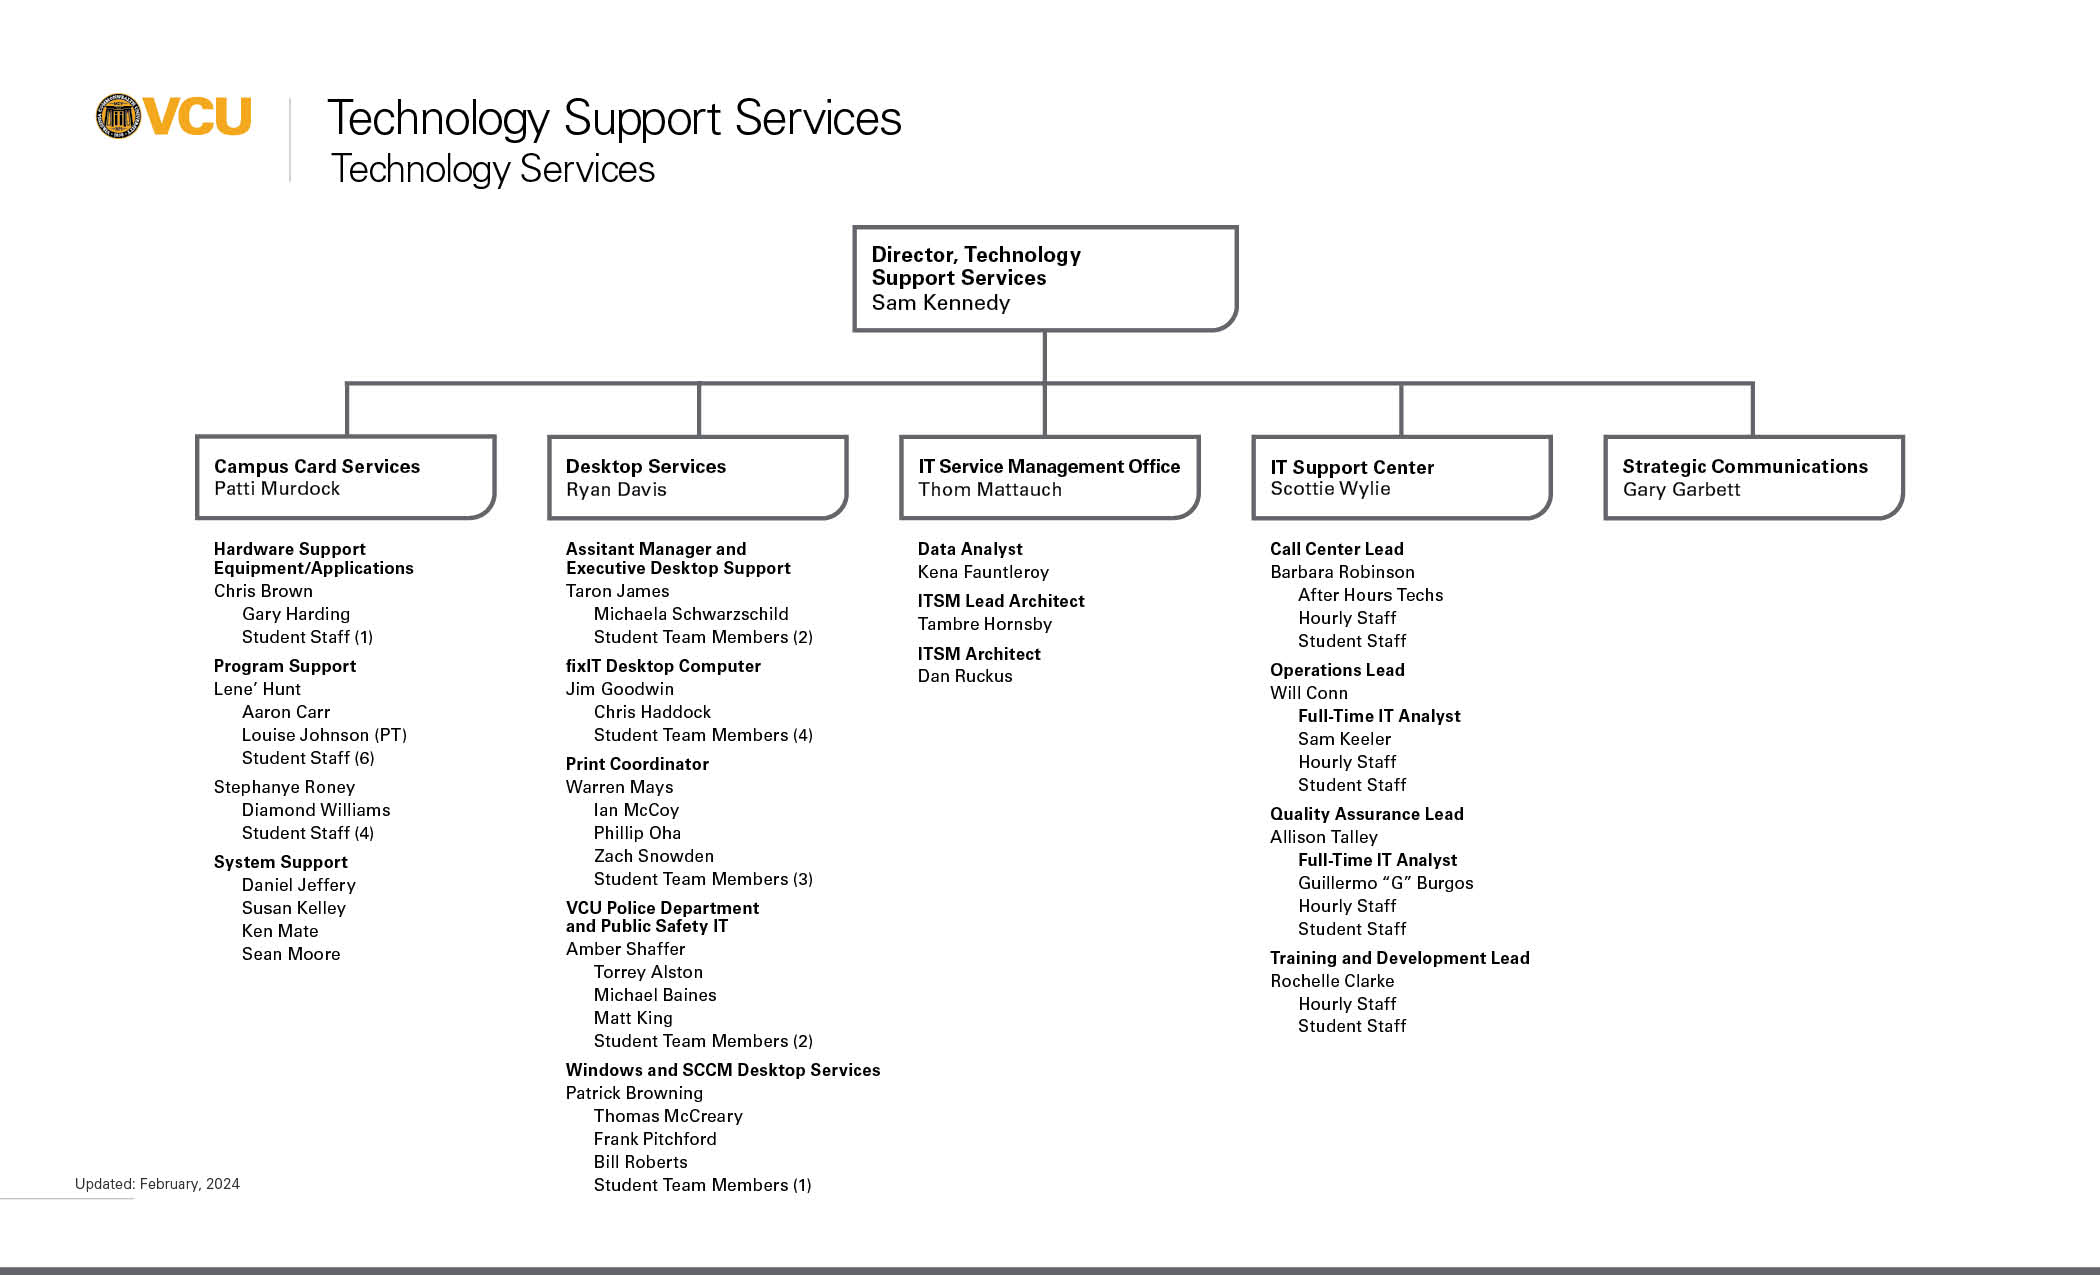 Tech Support Services org chart